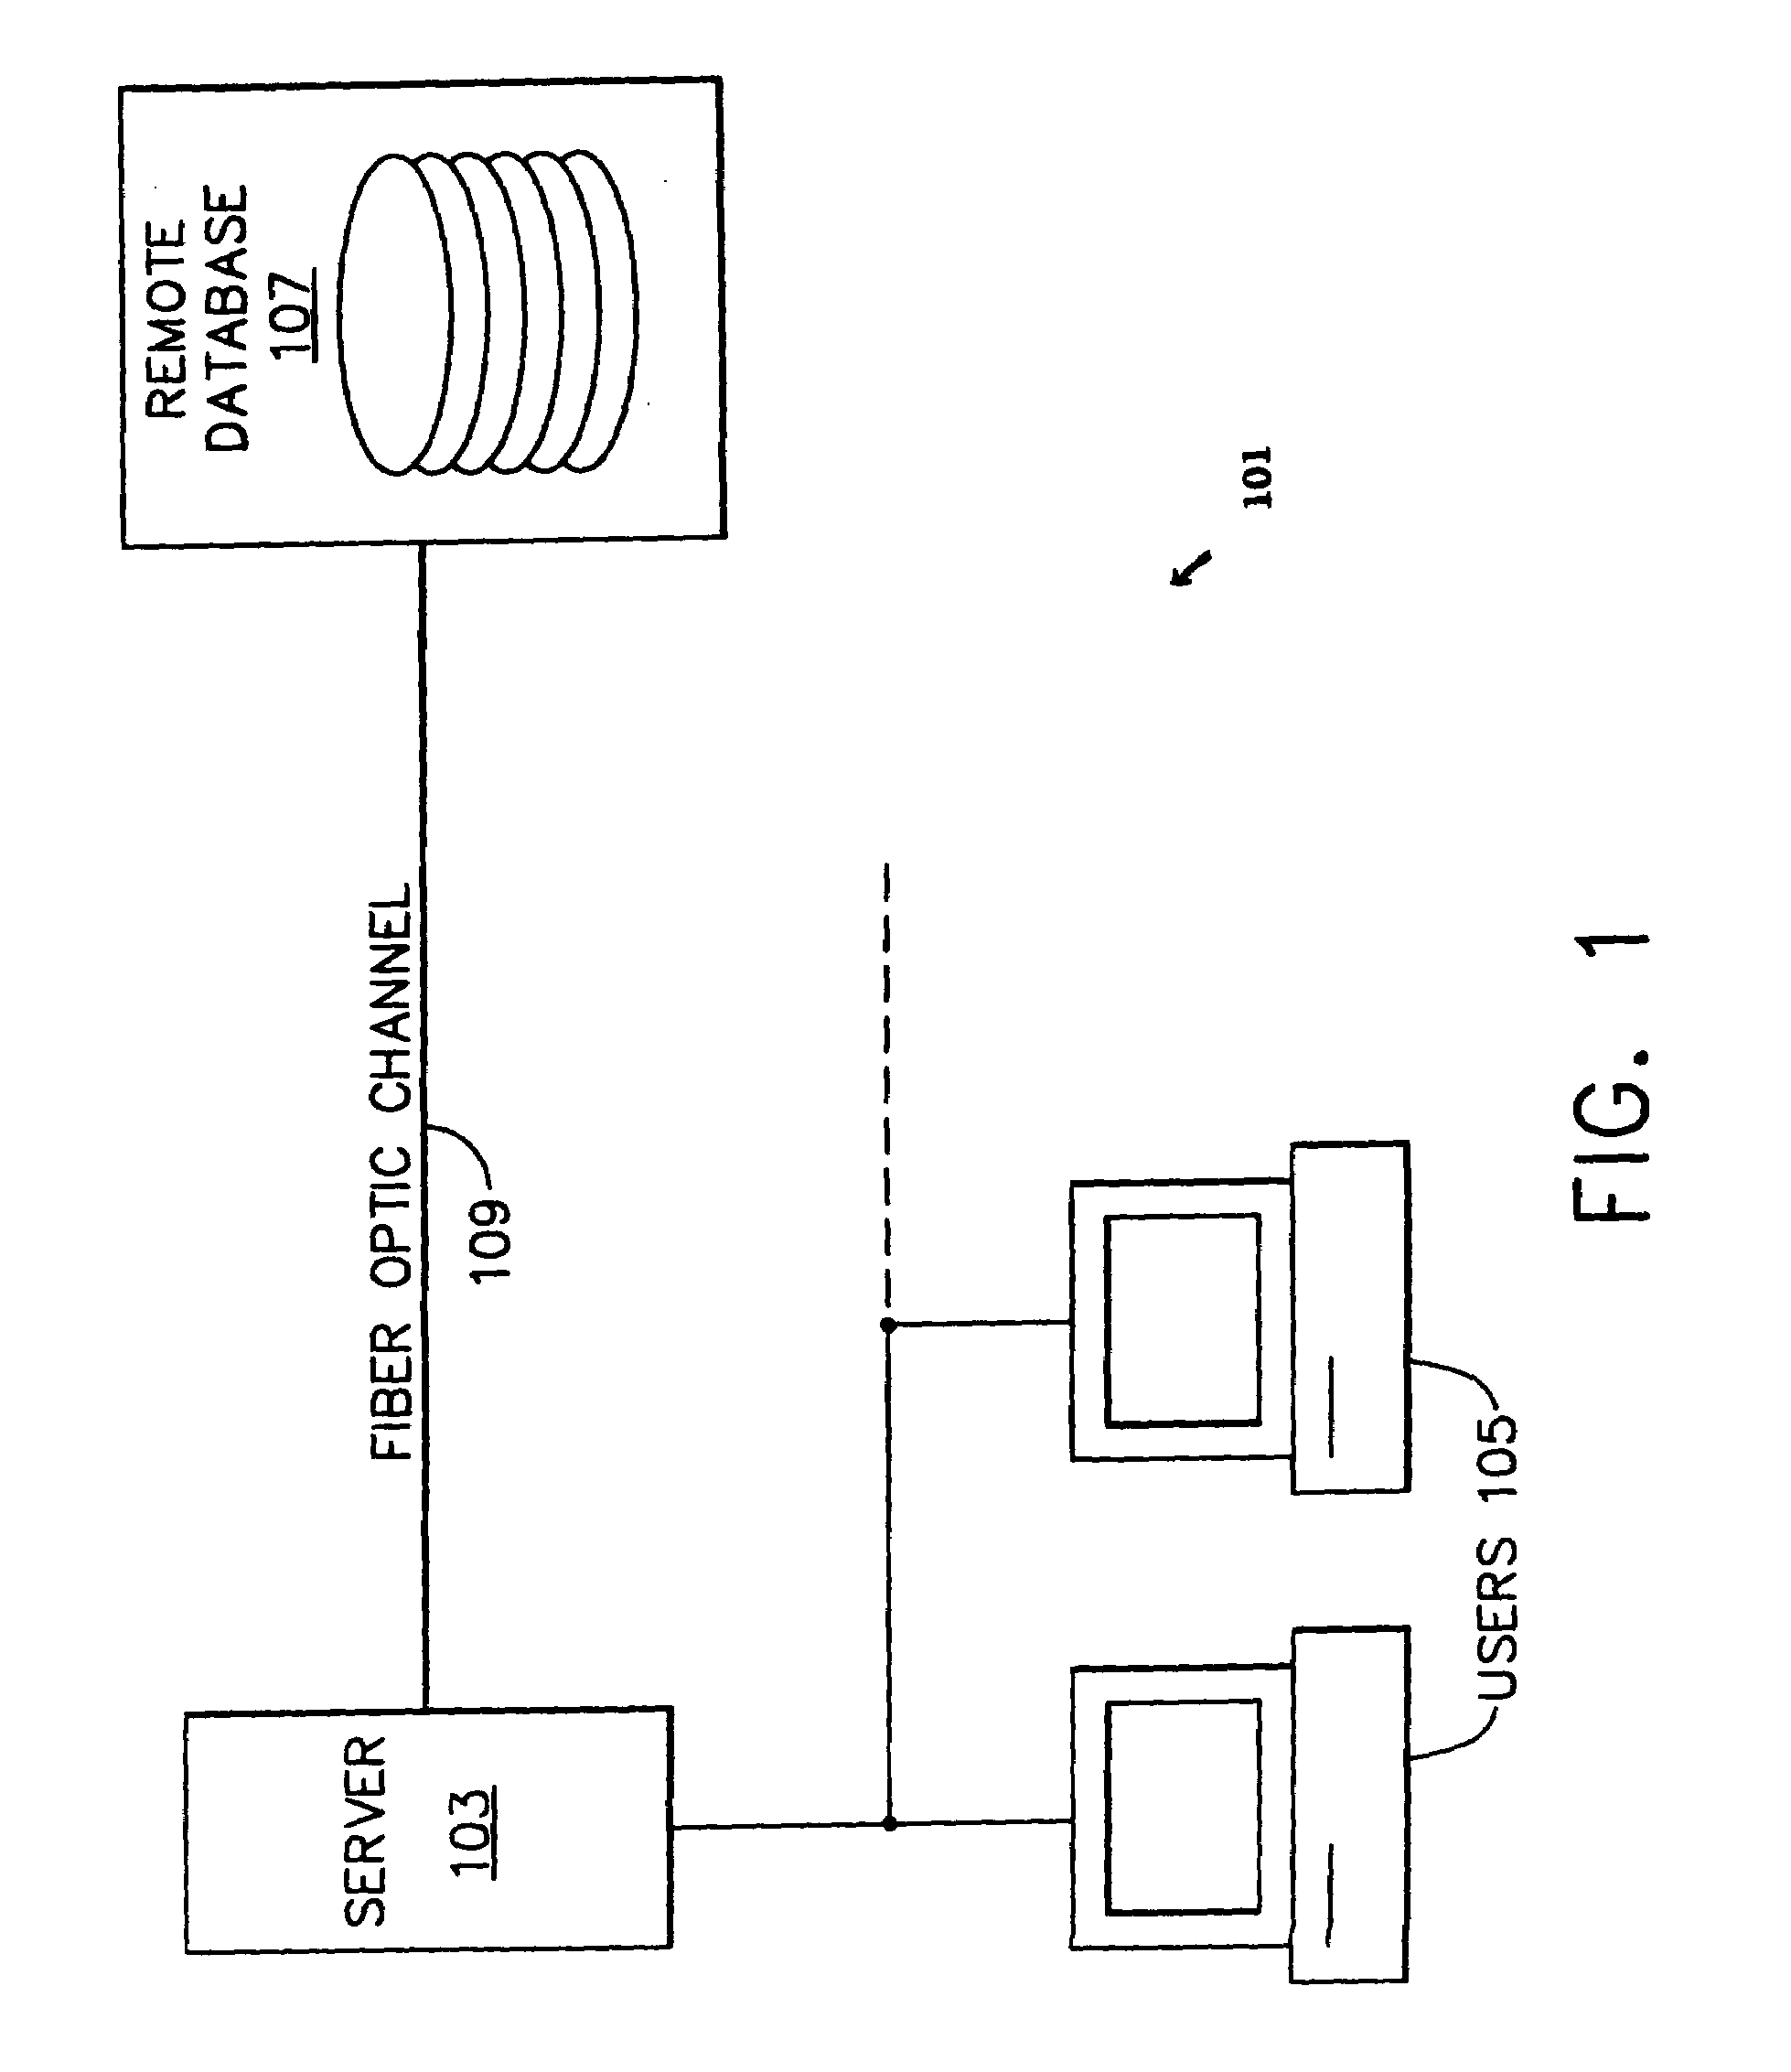 Method and system to identify and characterize nonlinearities in optical communications channels